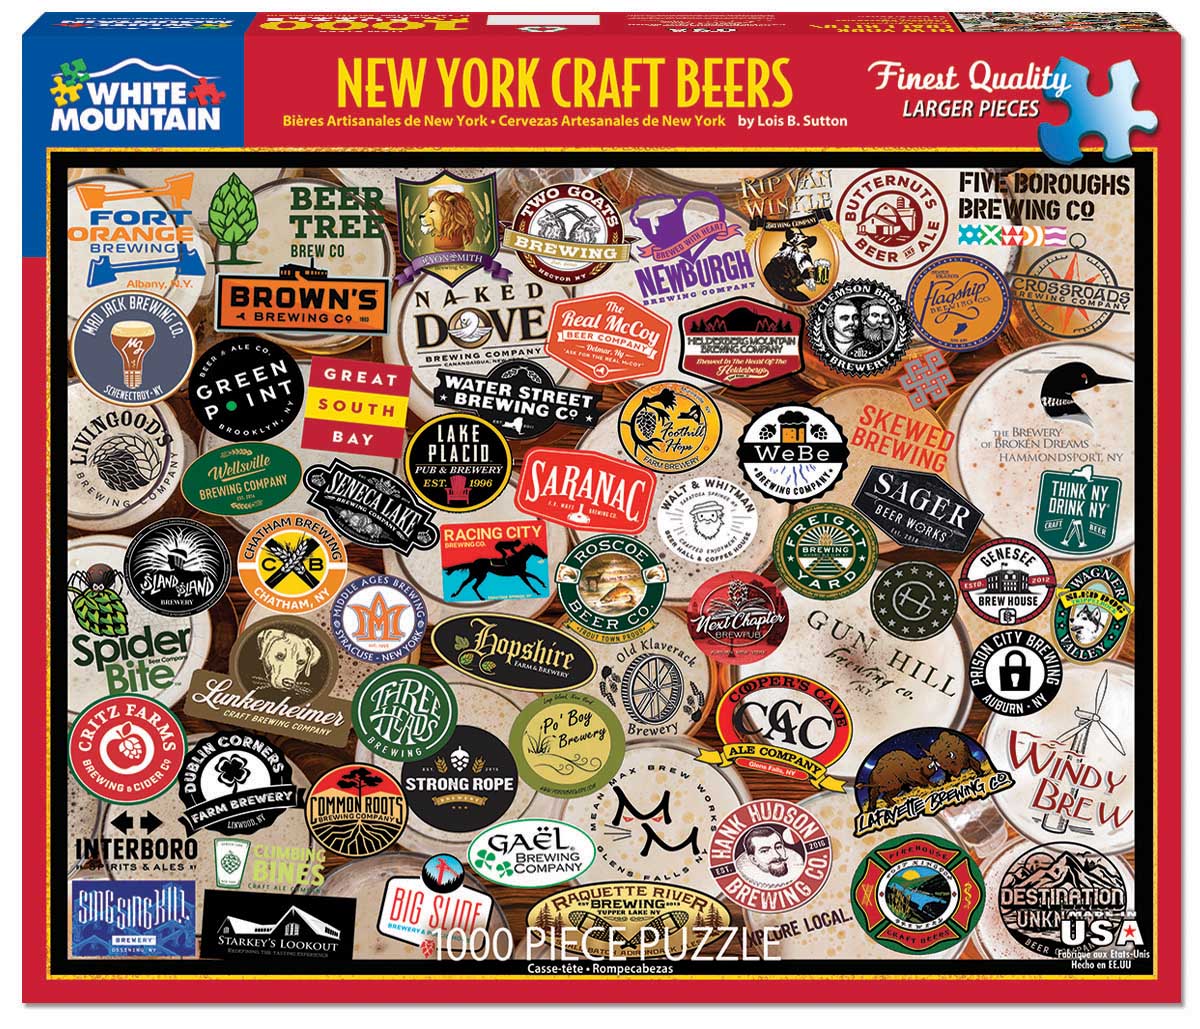 NY Craft Beers